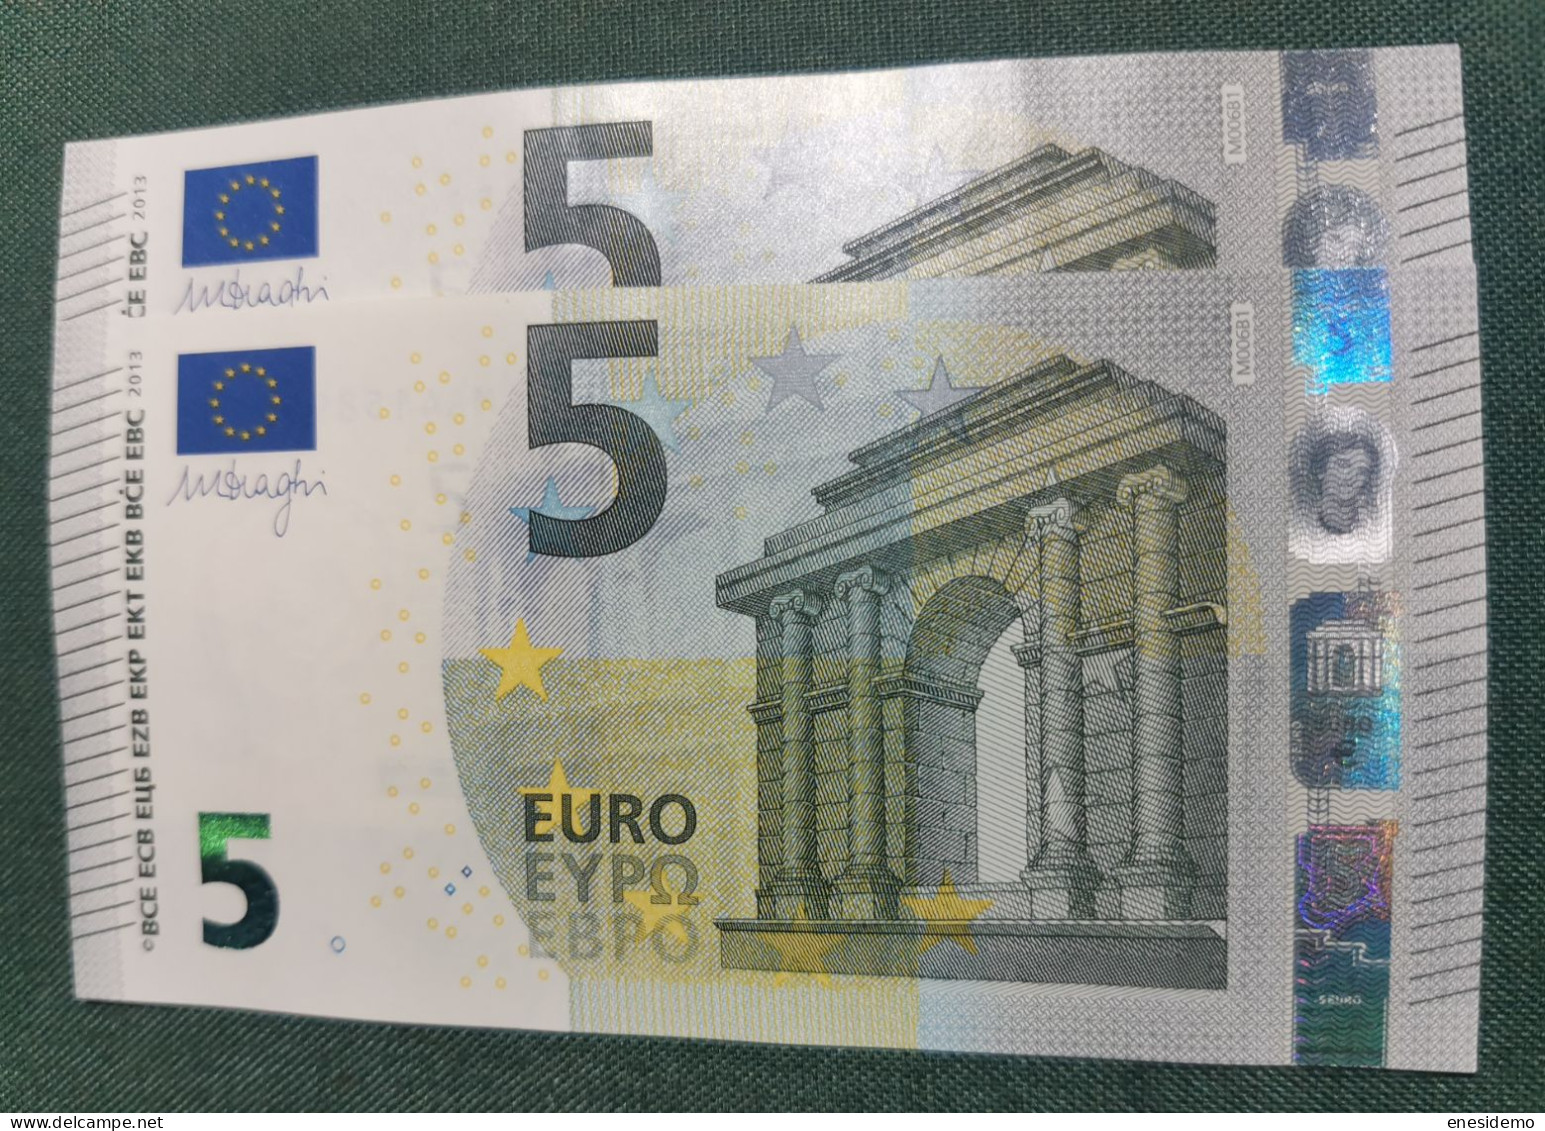 5 EURO PORTUGAL 2013 DRAGHI M006B1 MA CORRELATIVE COUPLE UNEVEN NICE NUMBER FOUR CONSECUTIVE NINES SC FDS UNC. PERFECT - 5 Euro